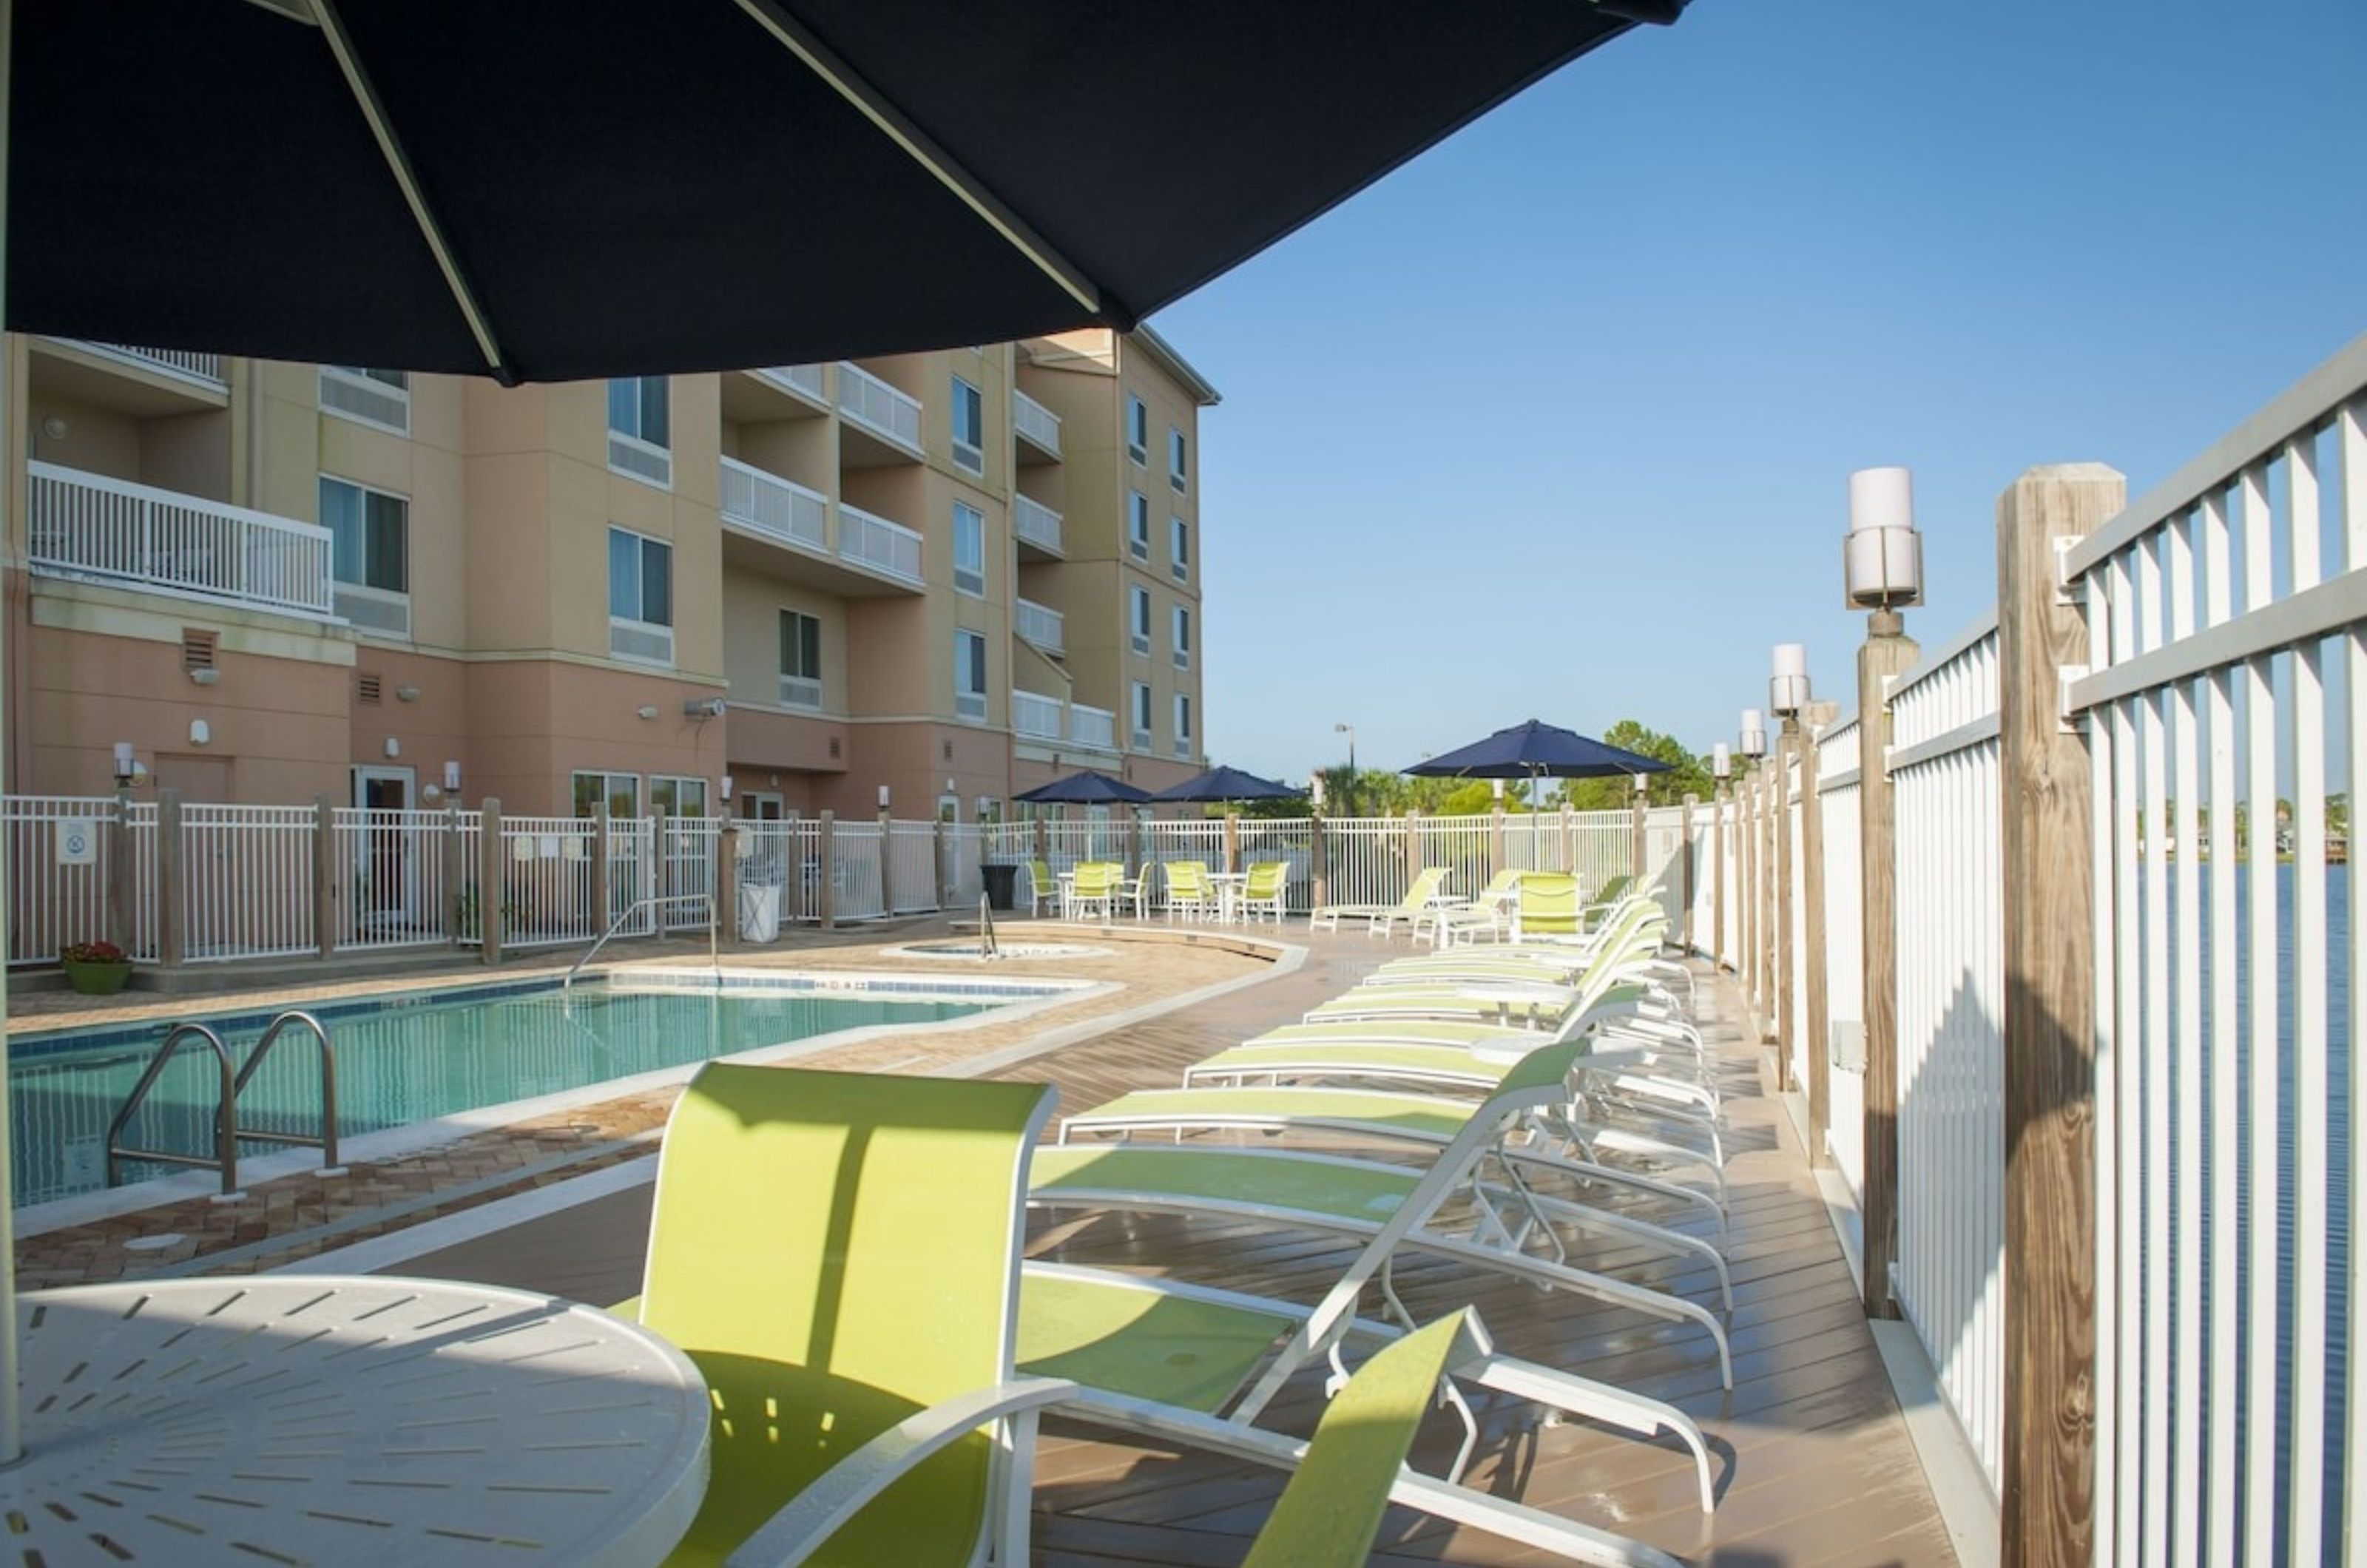 Pool chairs and umbrellas next to the outdoor pool at Fairfield Inn and Suites 